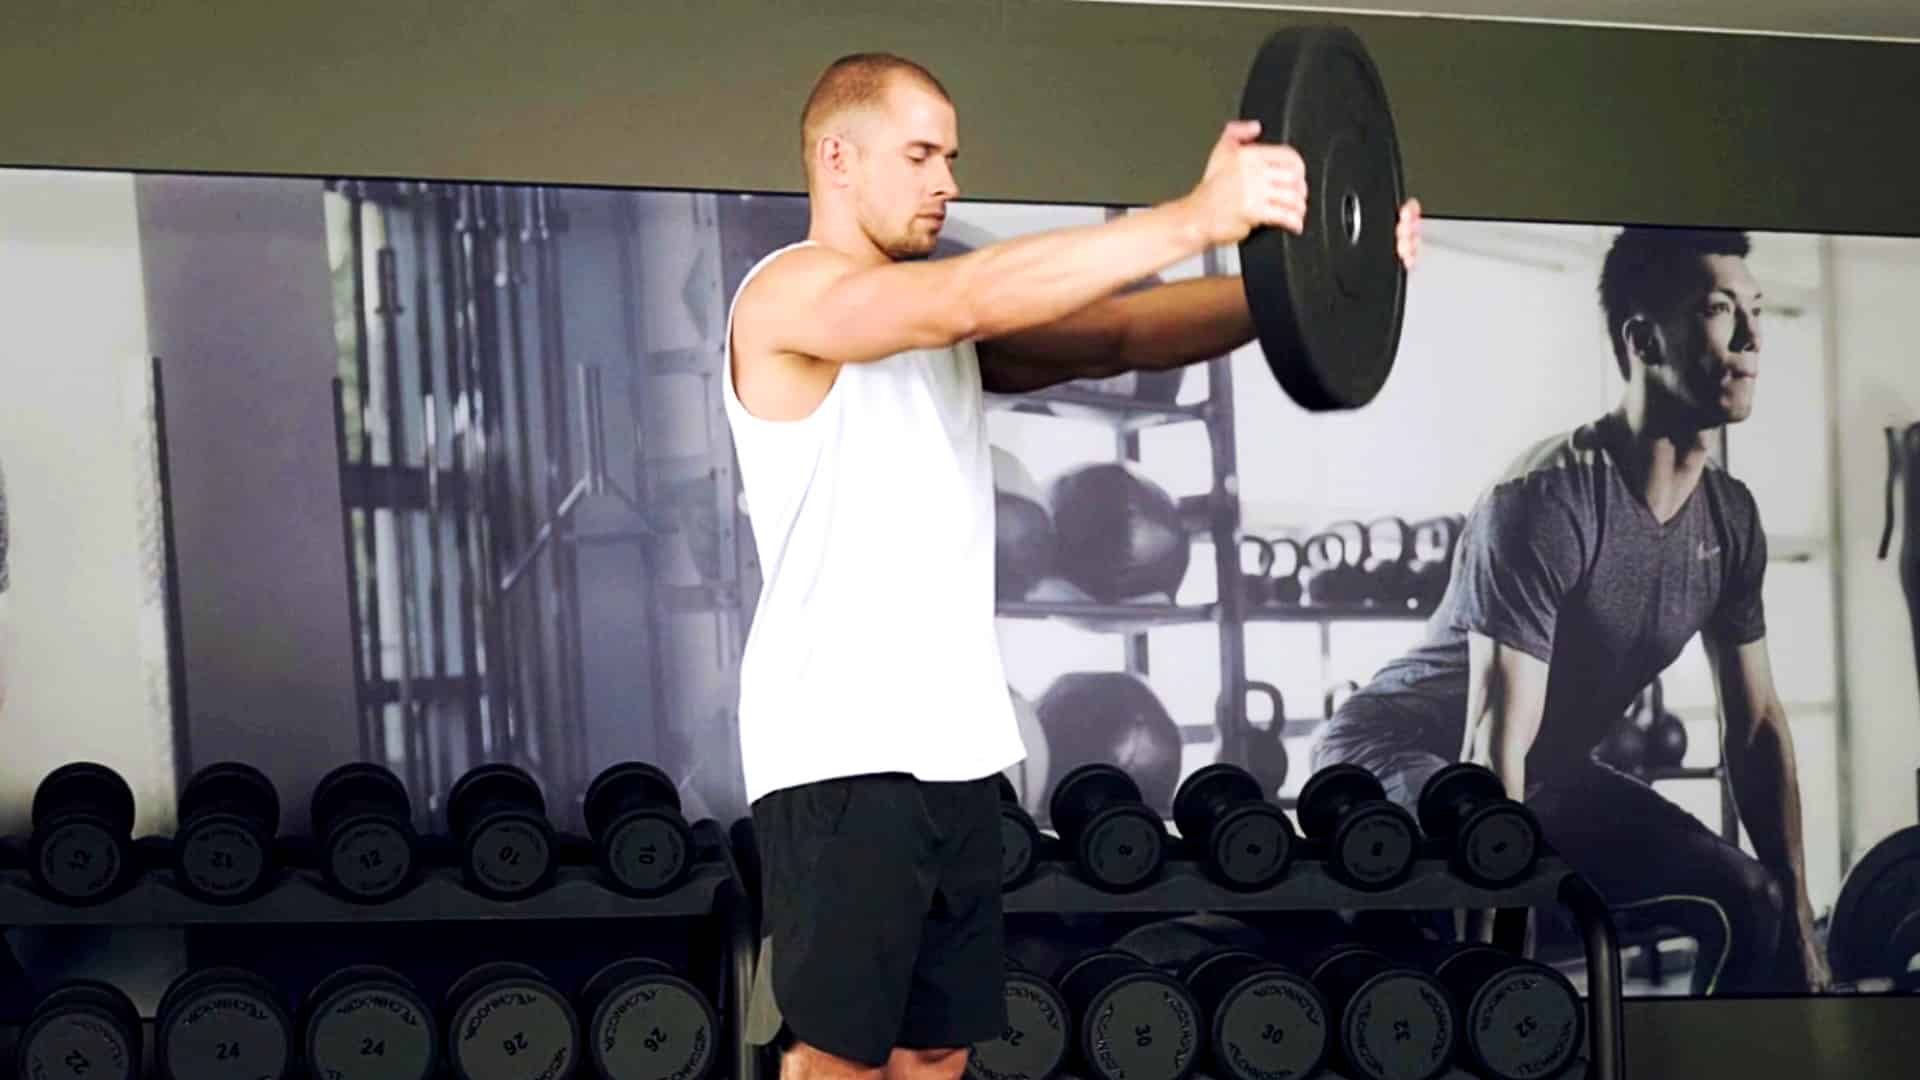 Plate Front Raise How To Do, Muscle Worked & Tips